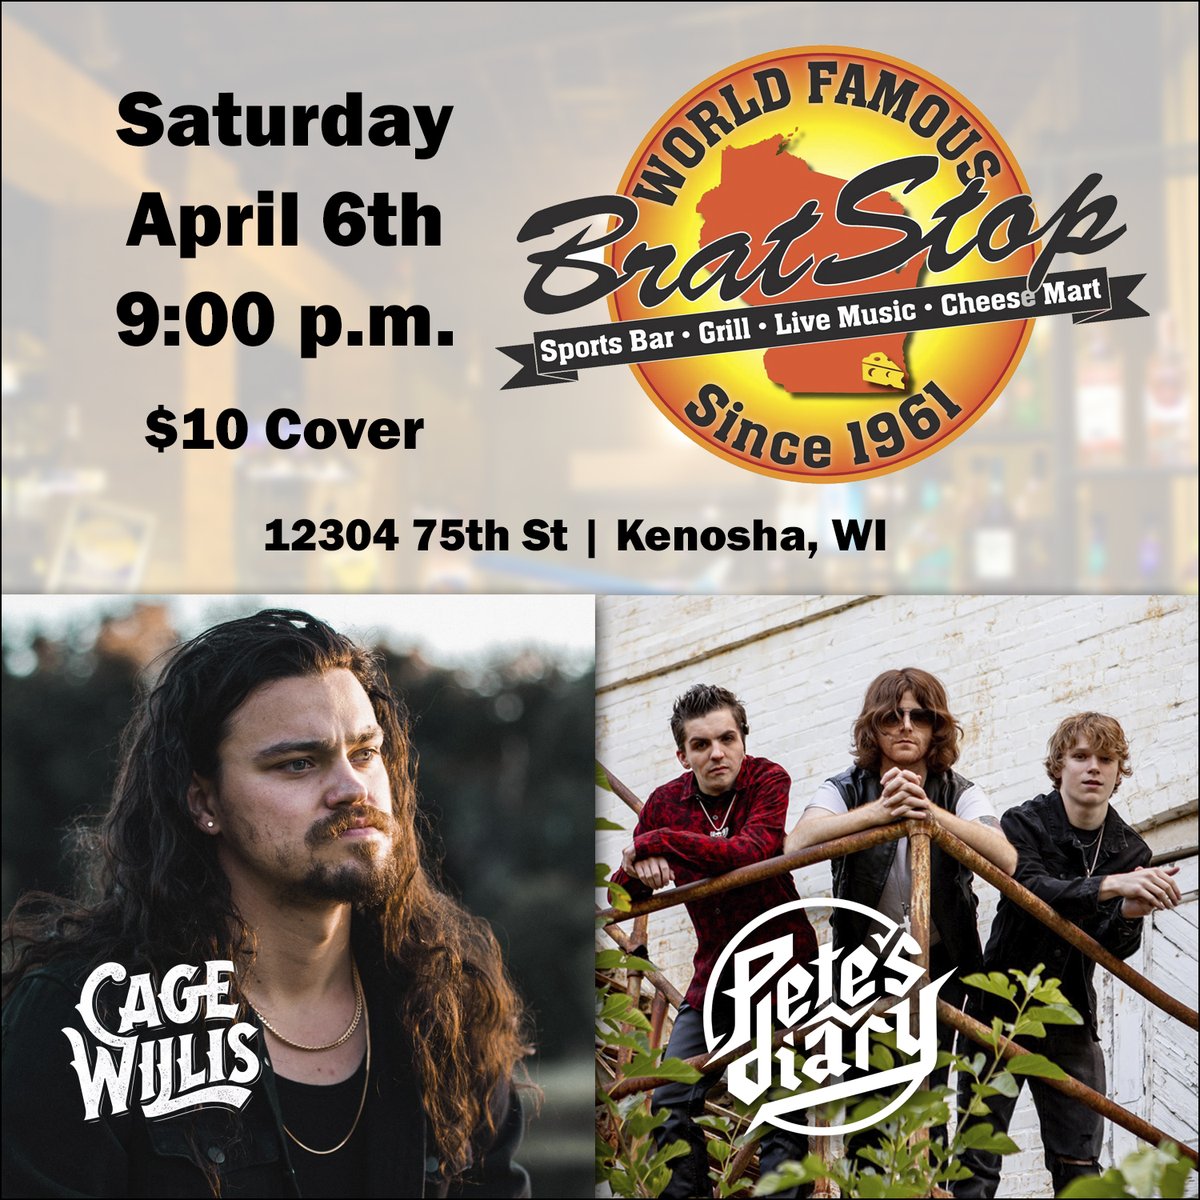 We're excited for our first show @bratstop in #Kenosha, WI this Saturday, April 6th with #CageWillis.

Cage Willis 9-10:15
#PetesDiary 10:30 - 12:00
$10 Door Cover, Ages 21+

@petedank 🎸